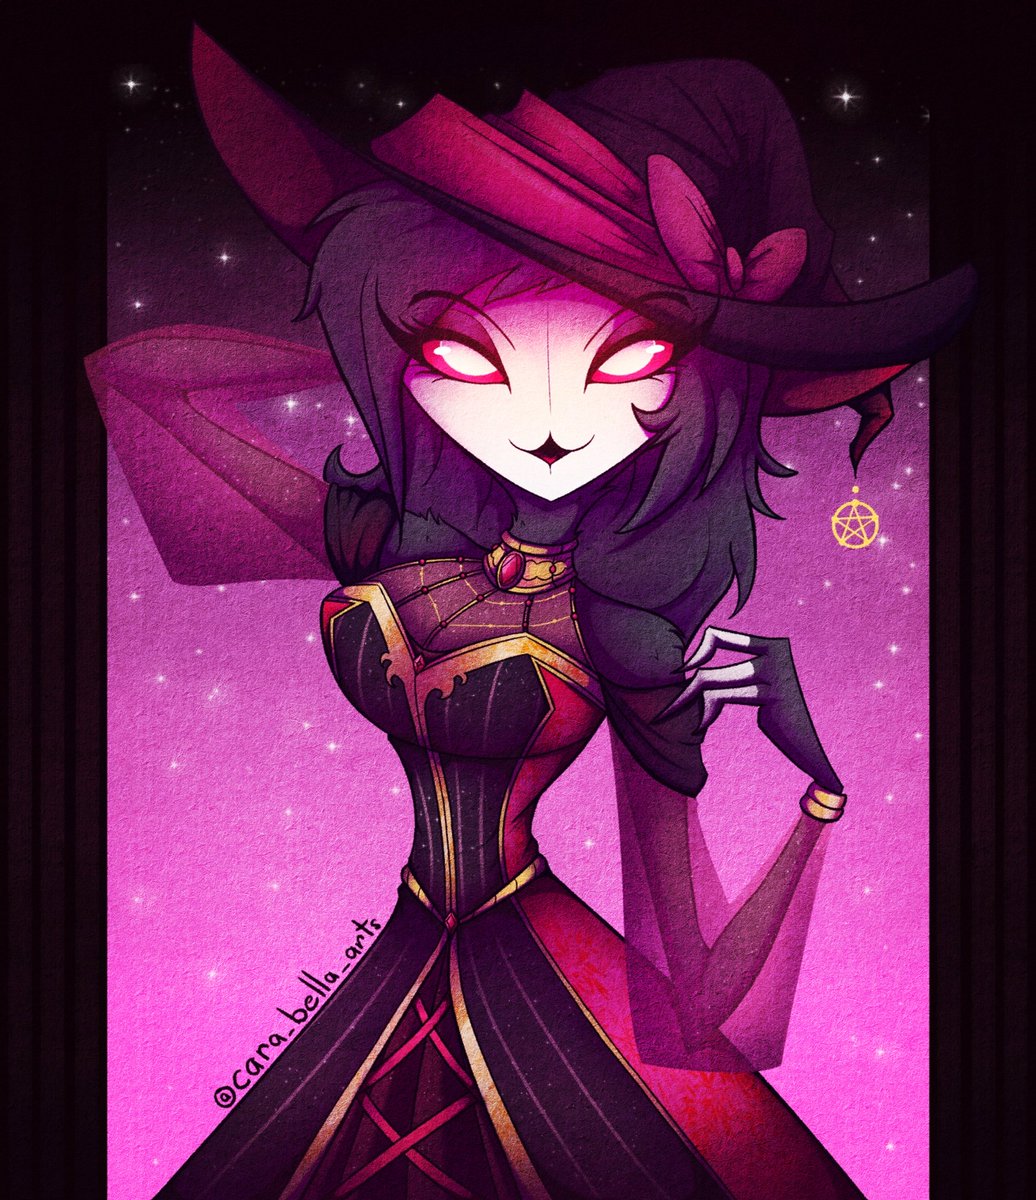 Witch Octavia
For #spookymonth 
#HelluvaBoss #HelluvaBossFanart #HelluvaBossOctavia